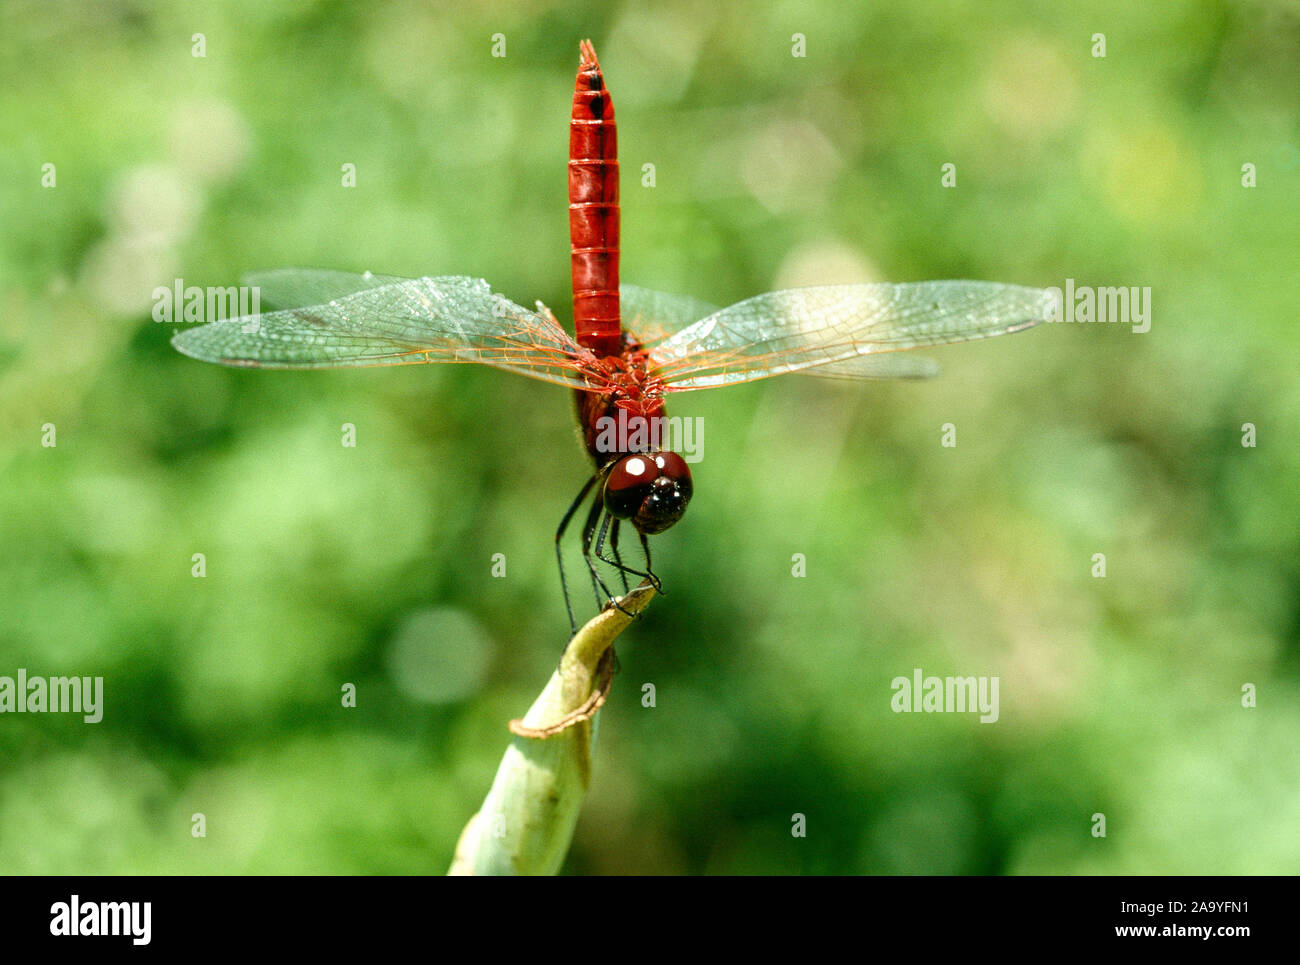 Dragonfly indonesia